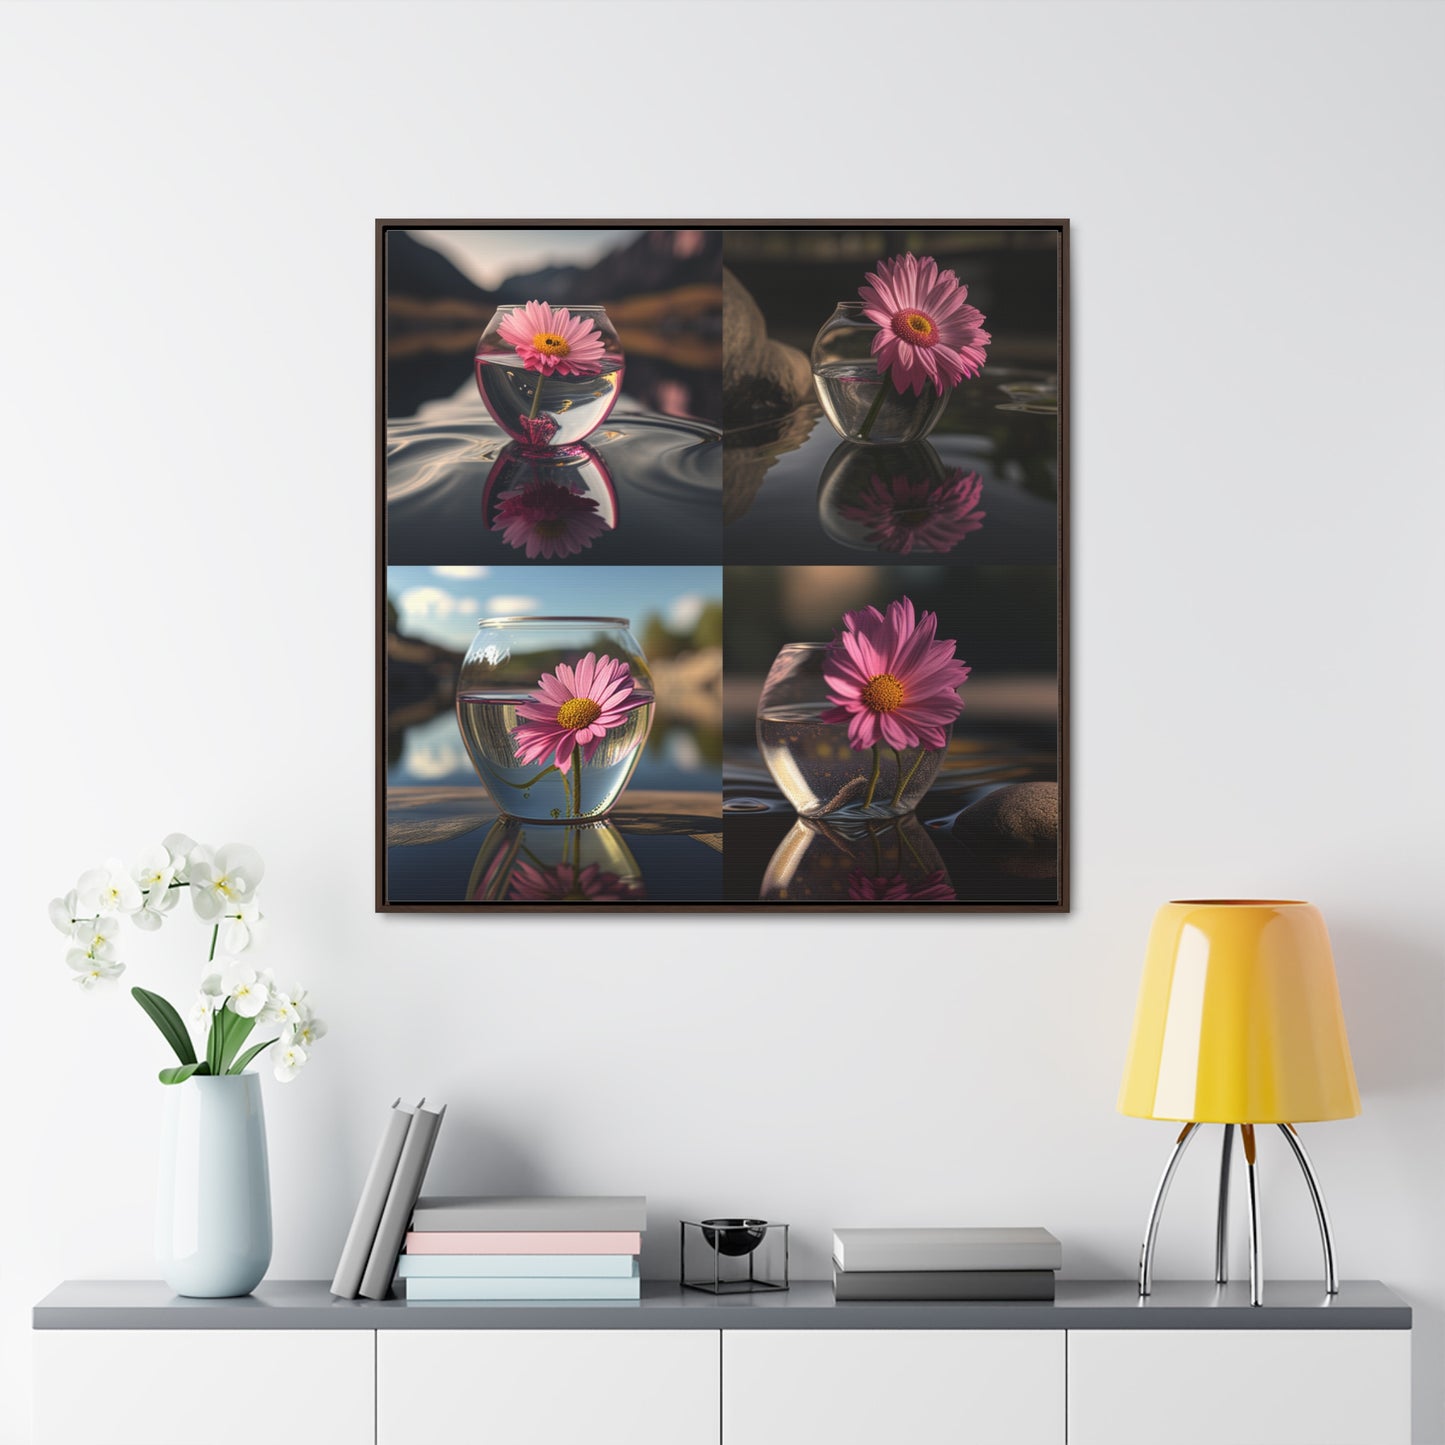 Gallery Canvas Wraps, Square Frame Pink Daisy 5